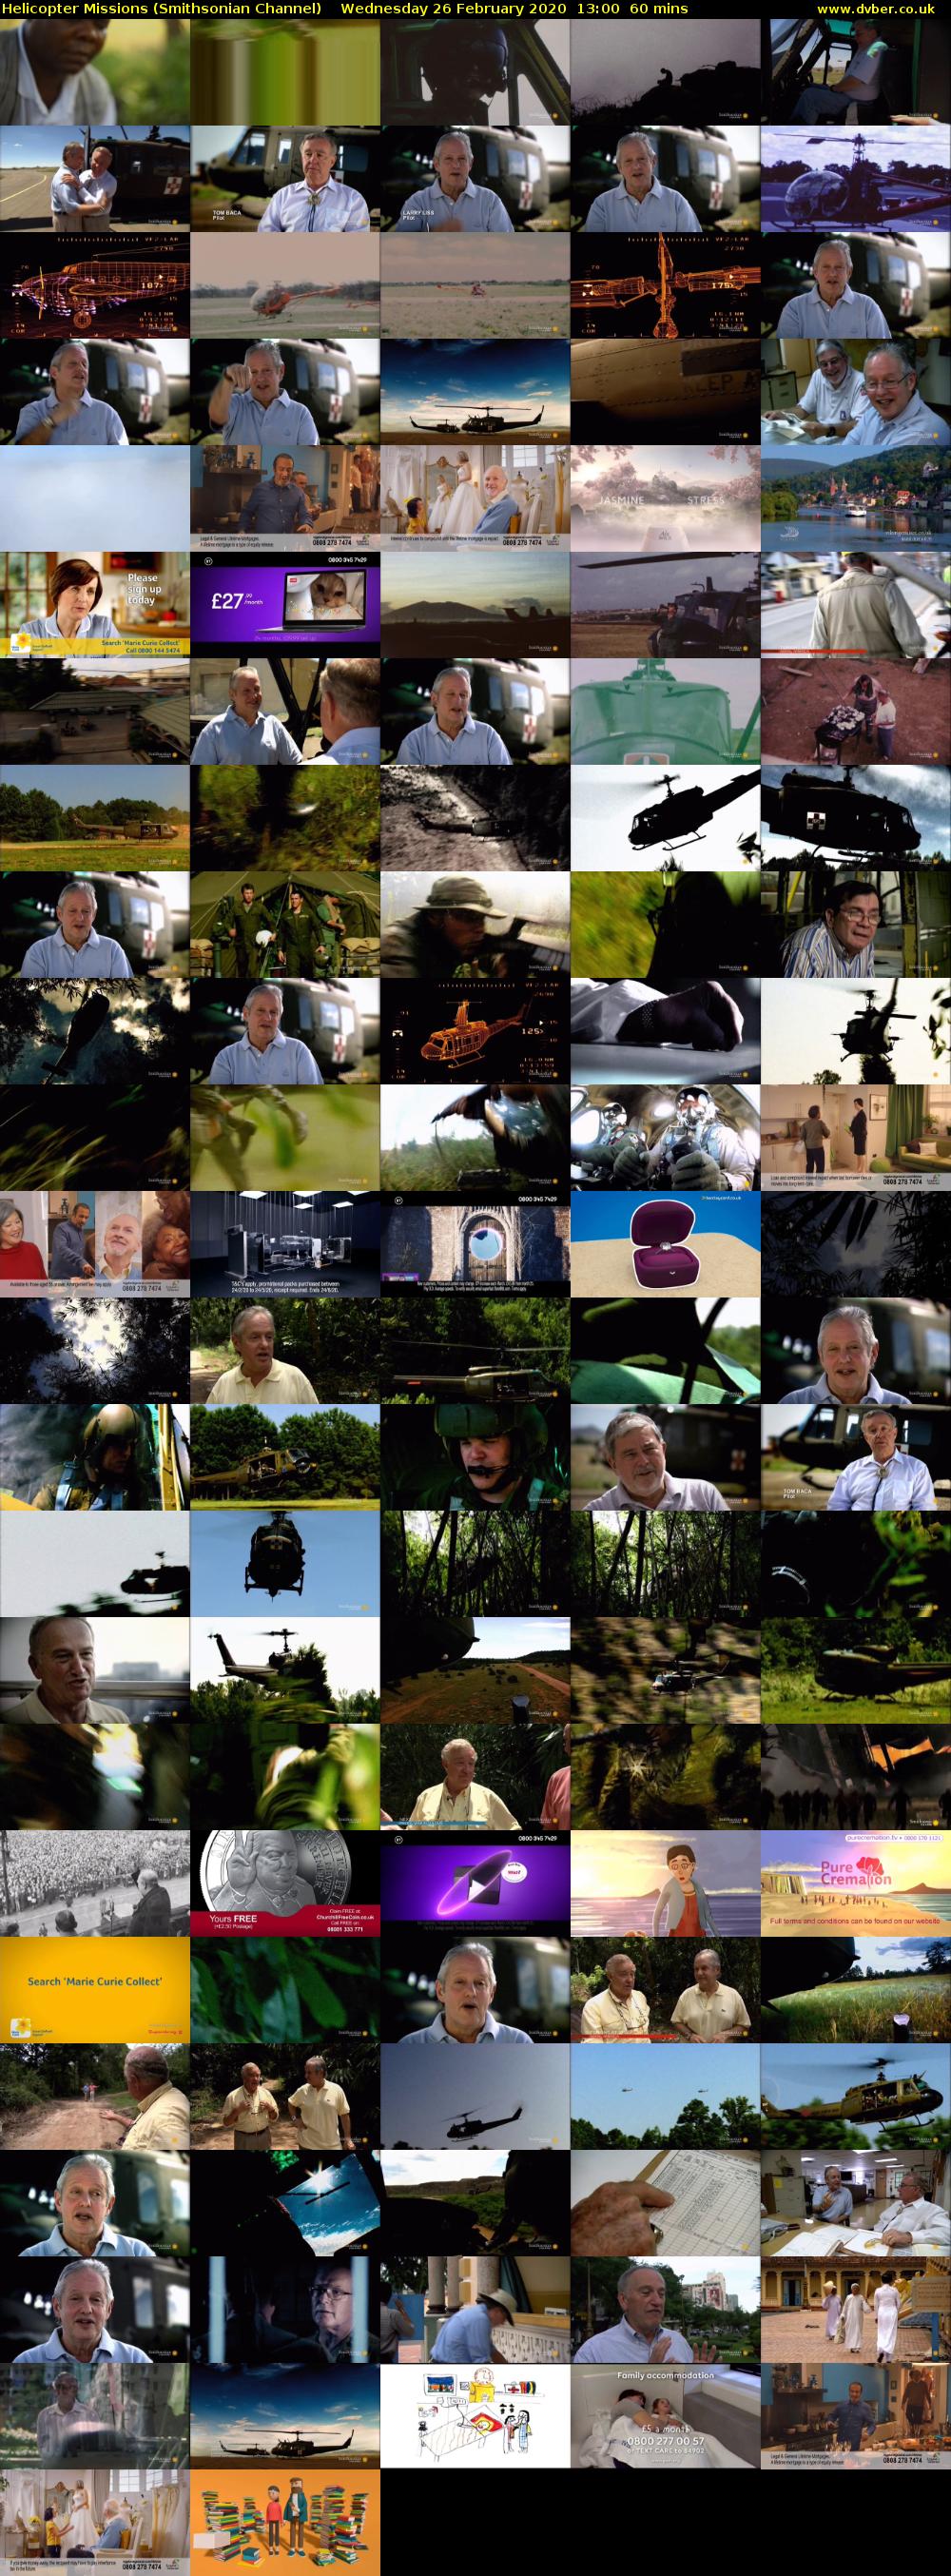 Helicopter Missions (Smithsonian Channel) Wednesday 26 February 2020 13:00 - 14:00